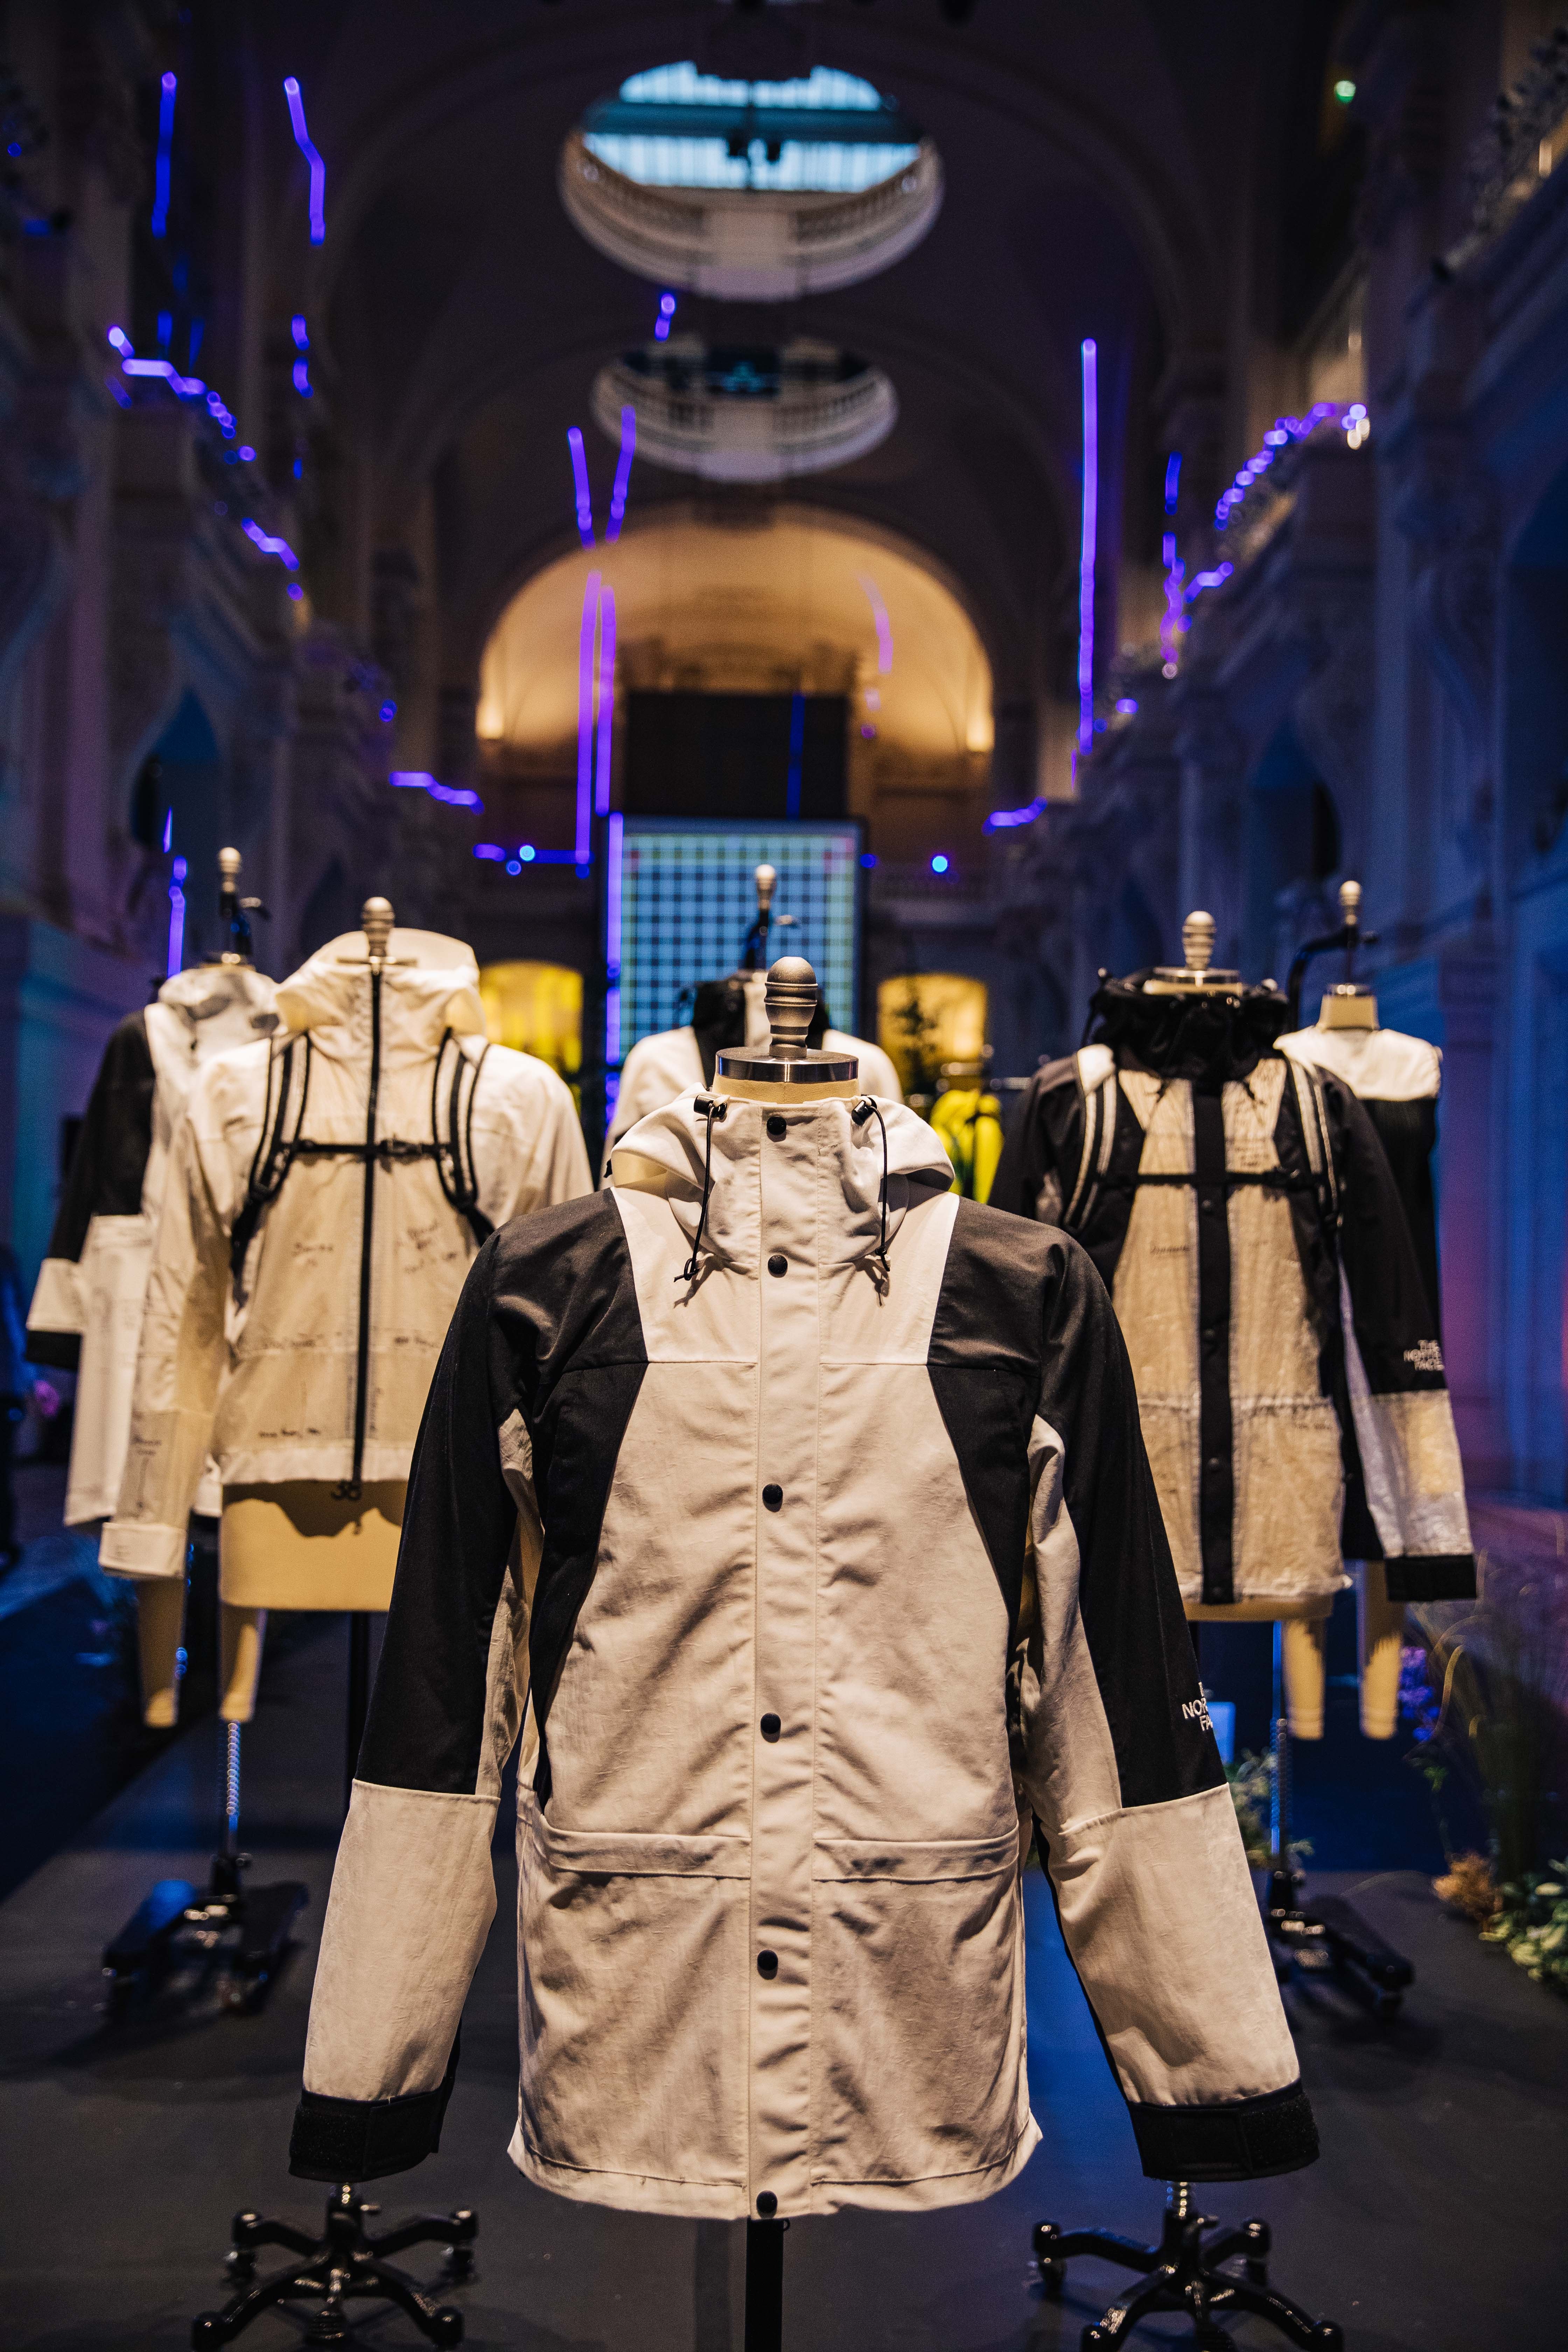 the north face ss20 black series paris fashion week debut event performance outwear design led collection range material technology